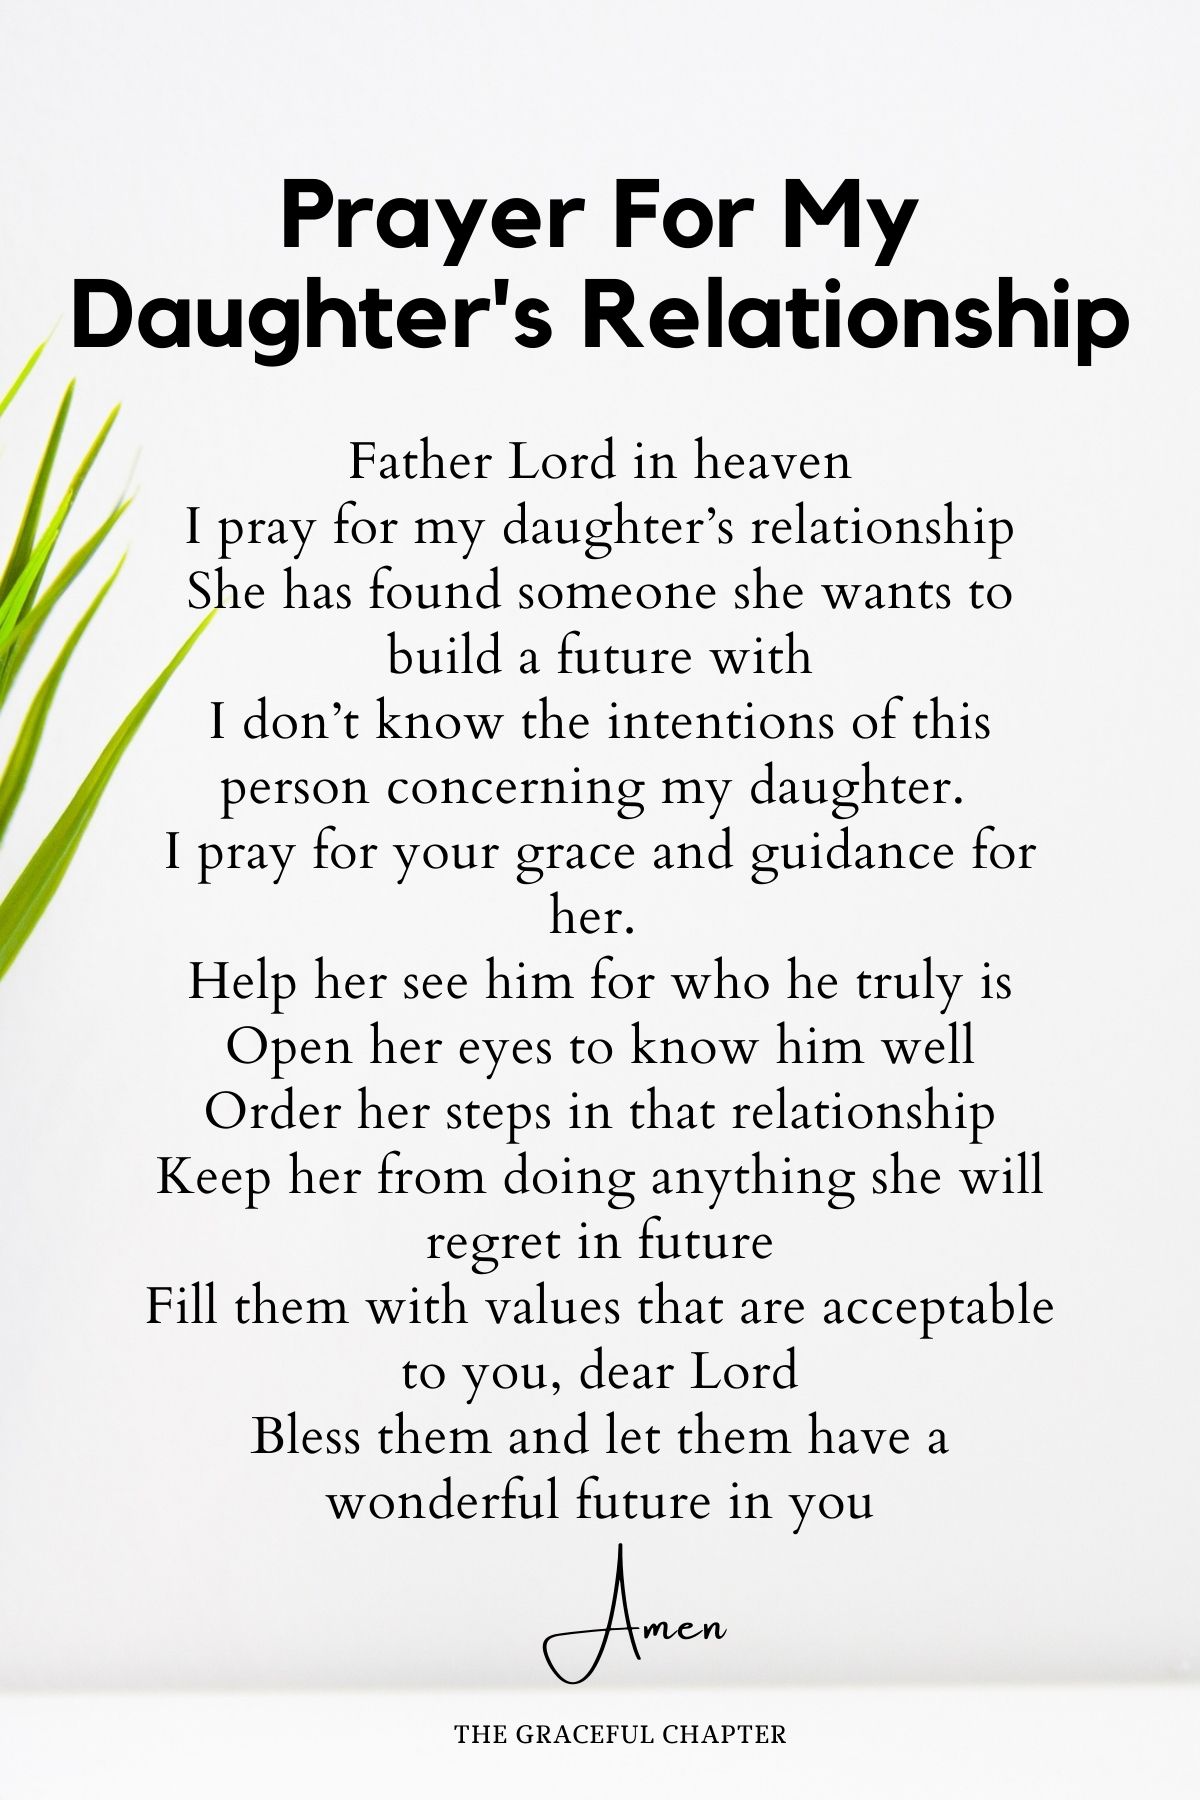 Prayer for my daughter's relationship